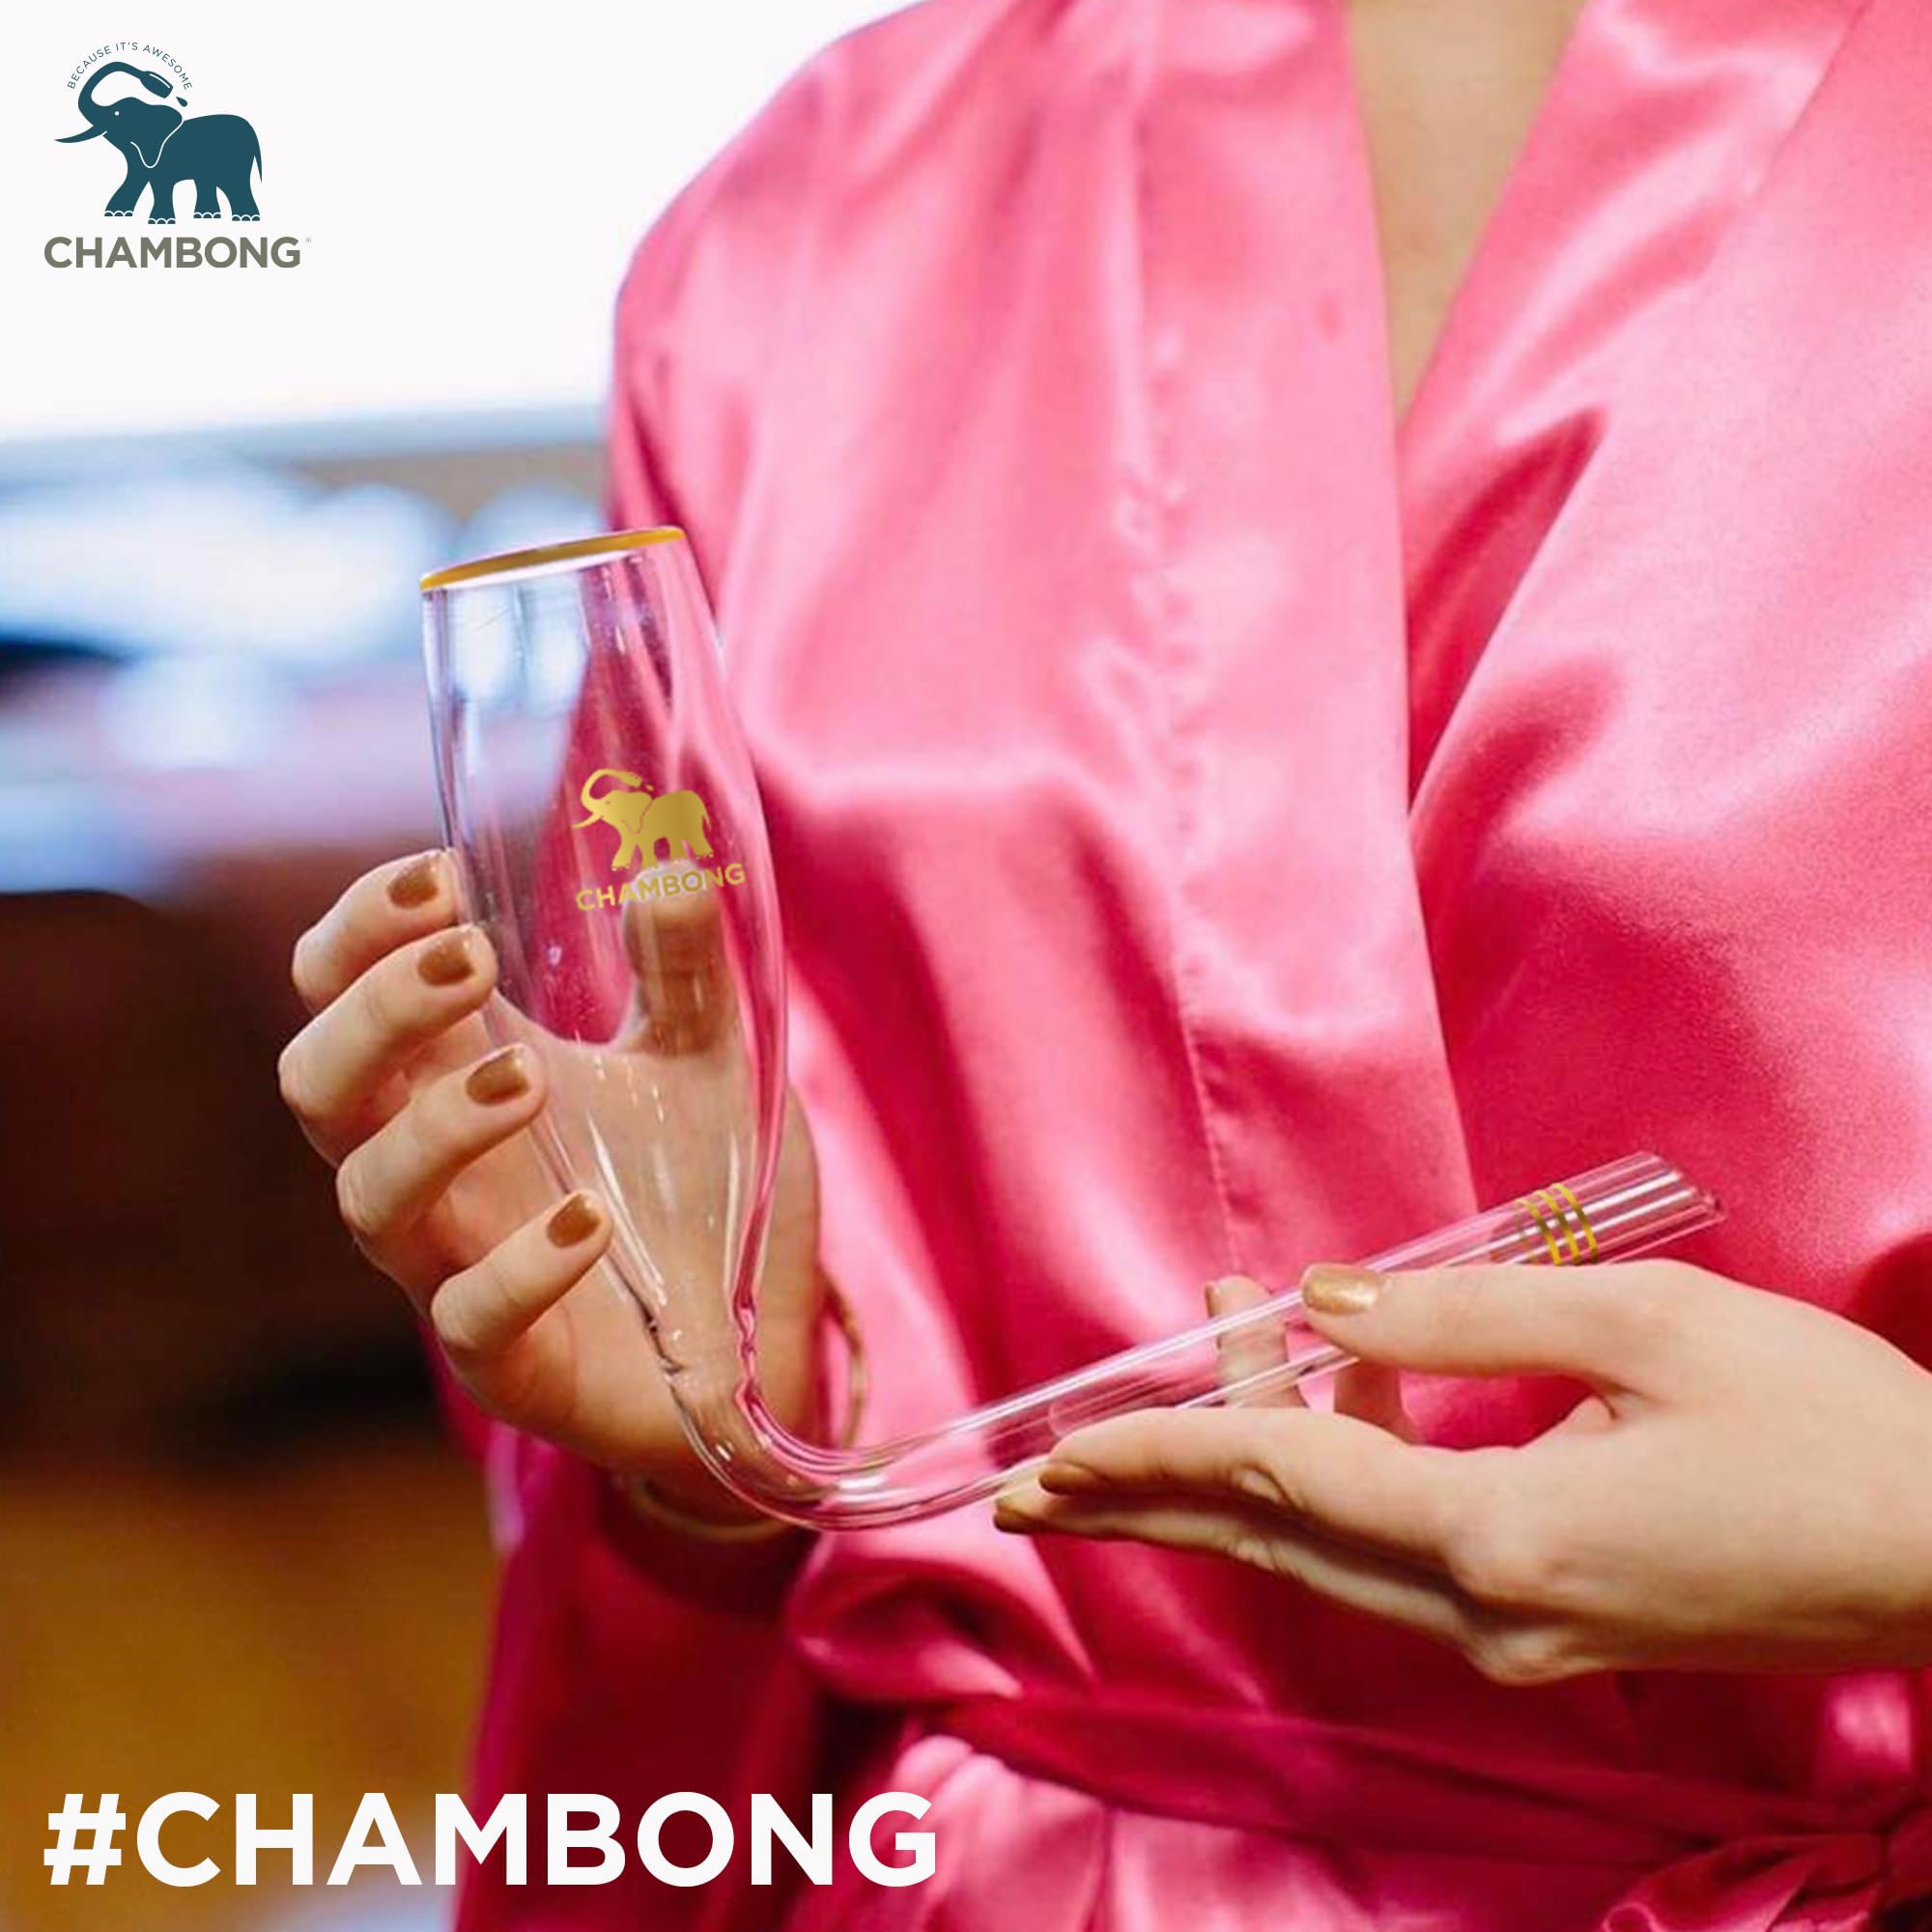 Chambong Queen-Size XL 1PC Glass with Gift Box